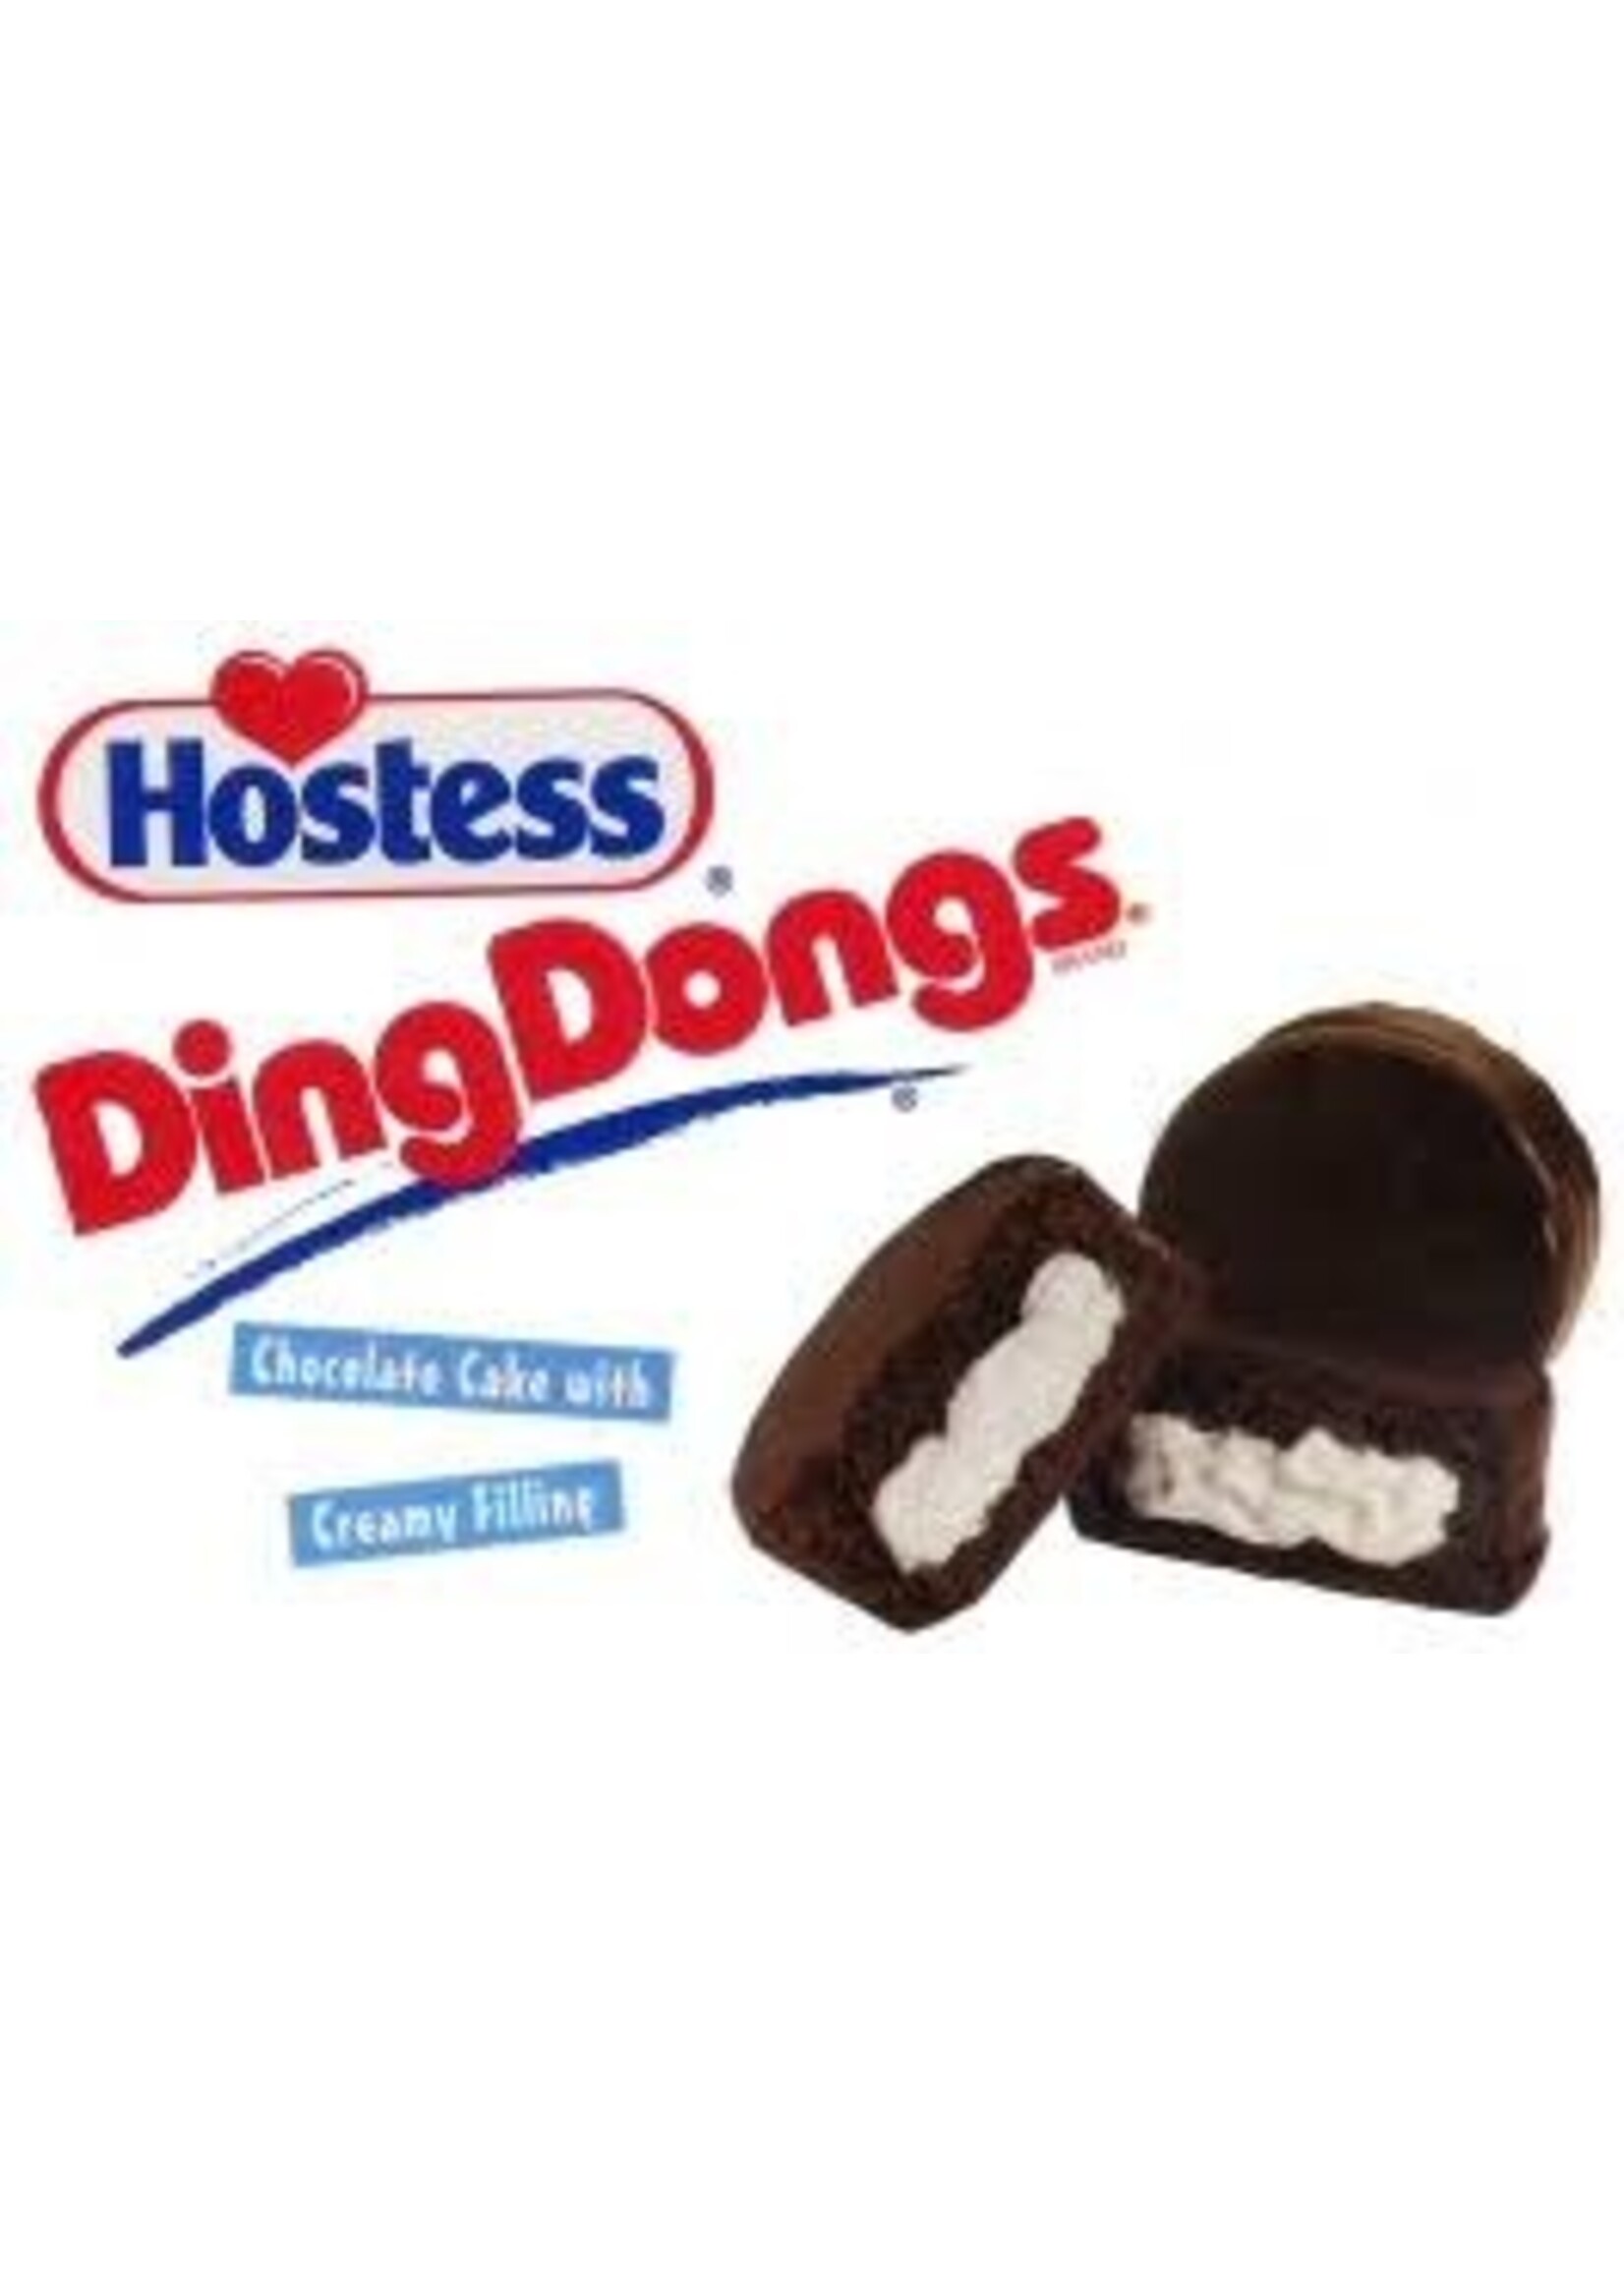 Hostess Ding-Dongs